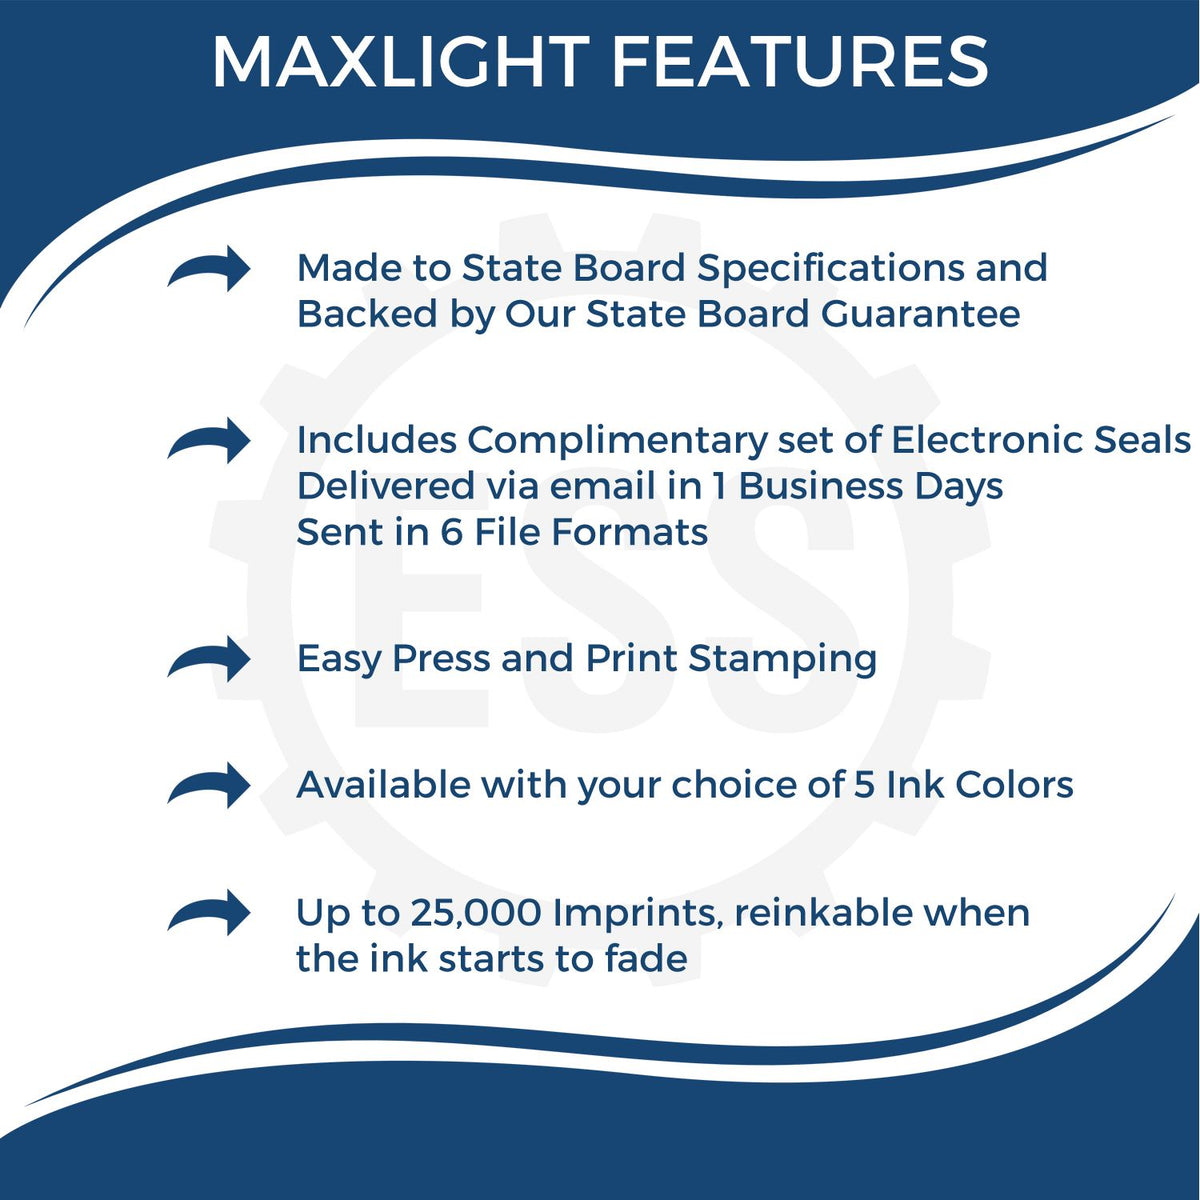 A picture of an infographic highlighting the selling points for the MaxLight Premium Pre-Inked Florida Rectangular Notarial Stamp